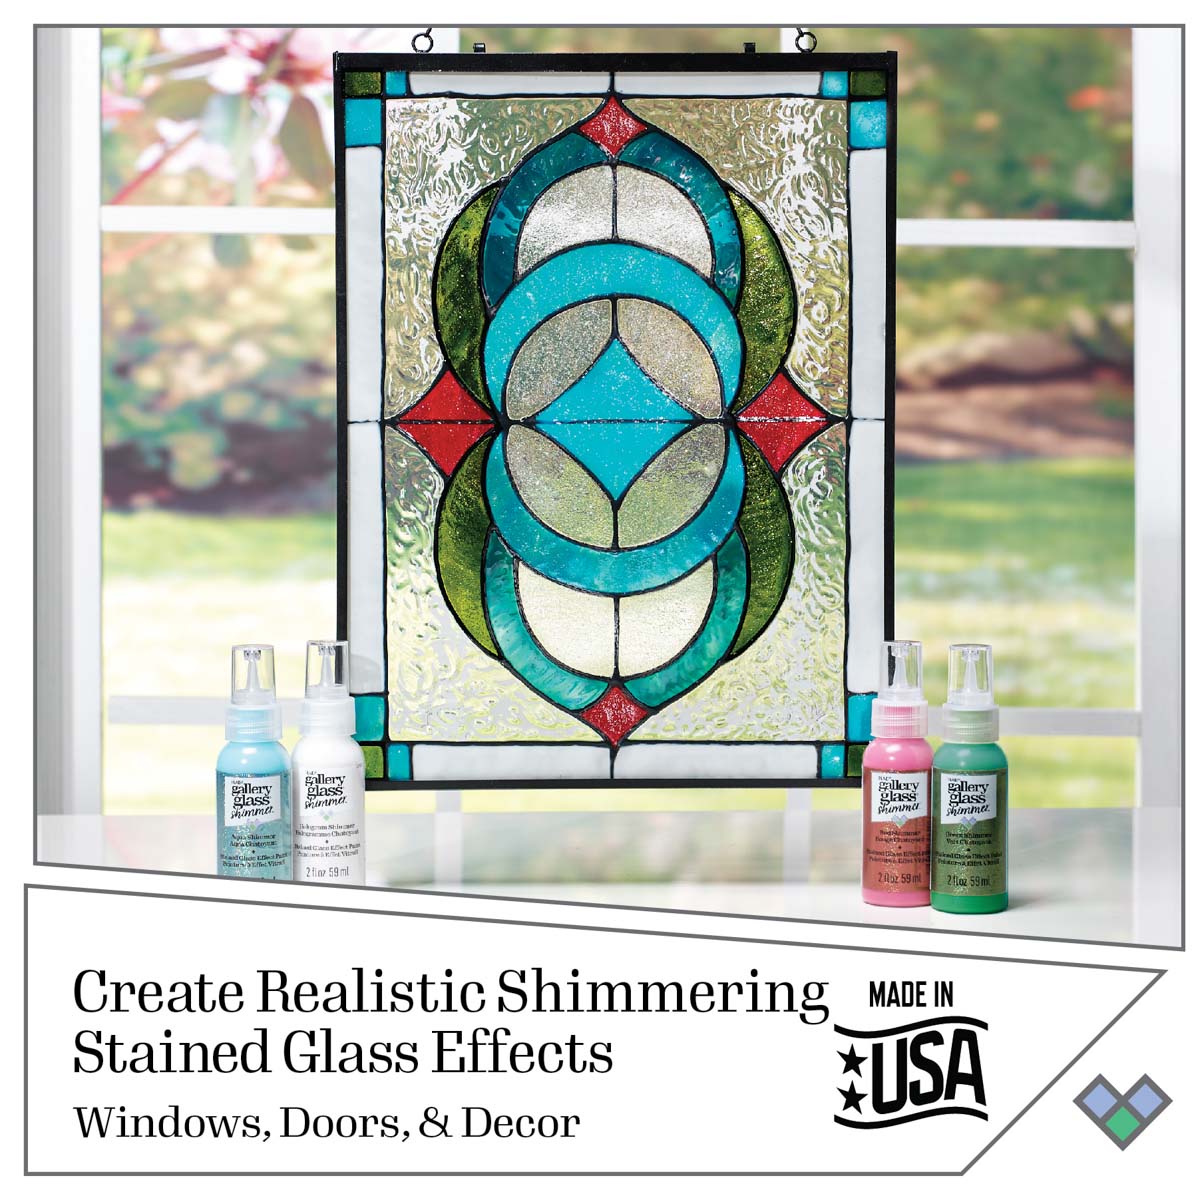 Gallery Glass ® Shimmer™ Stained Glass Effect Paint - Hologram, 2 oz. - 19687